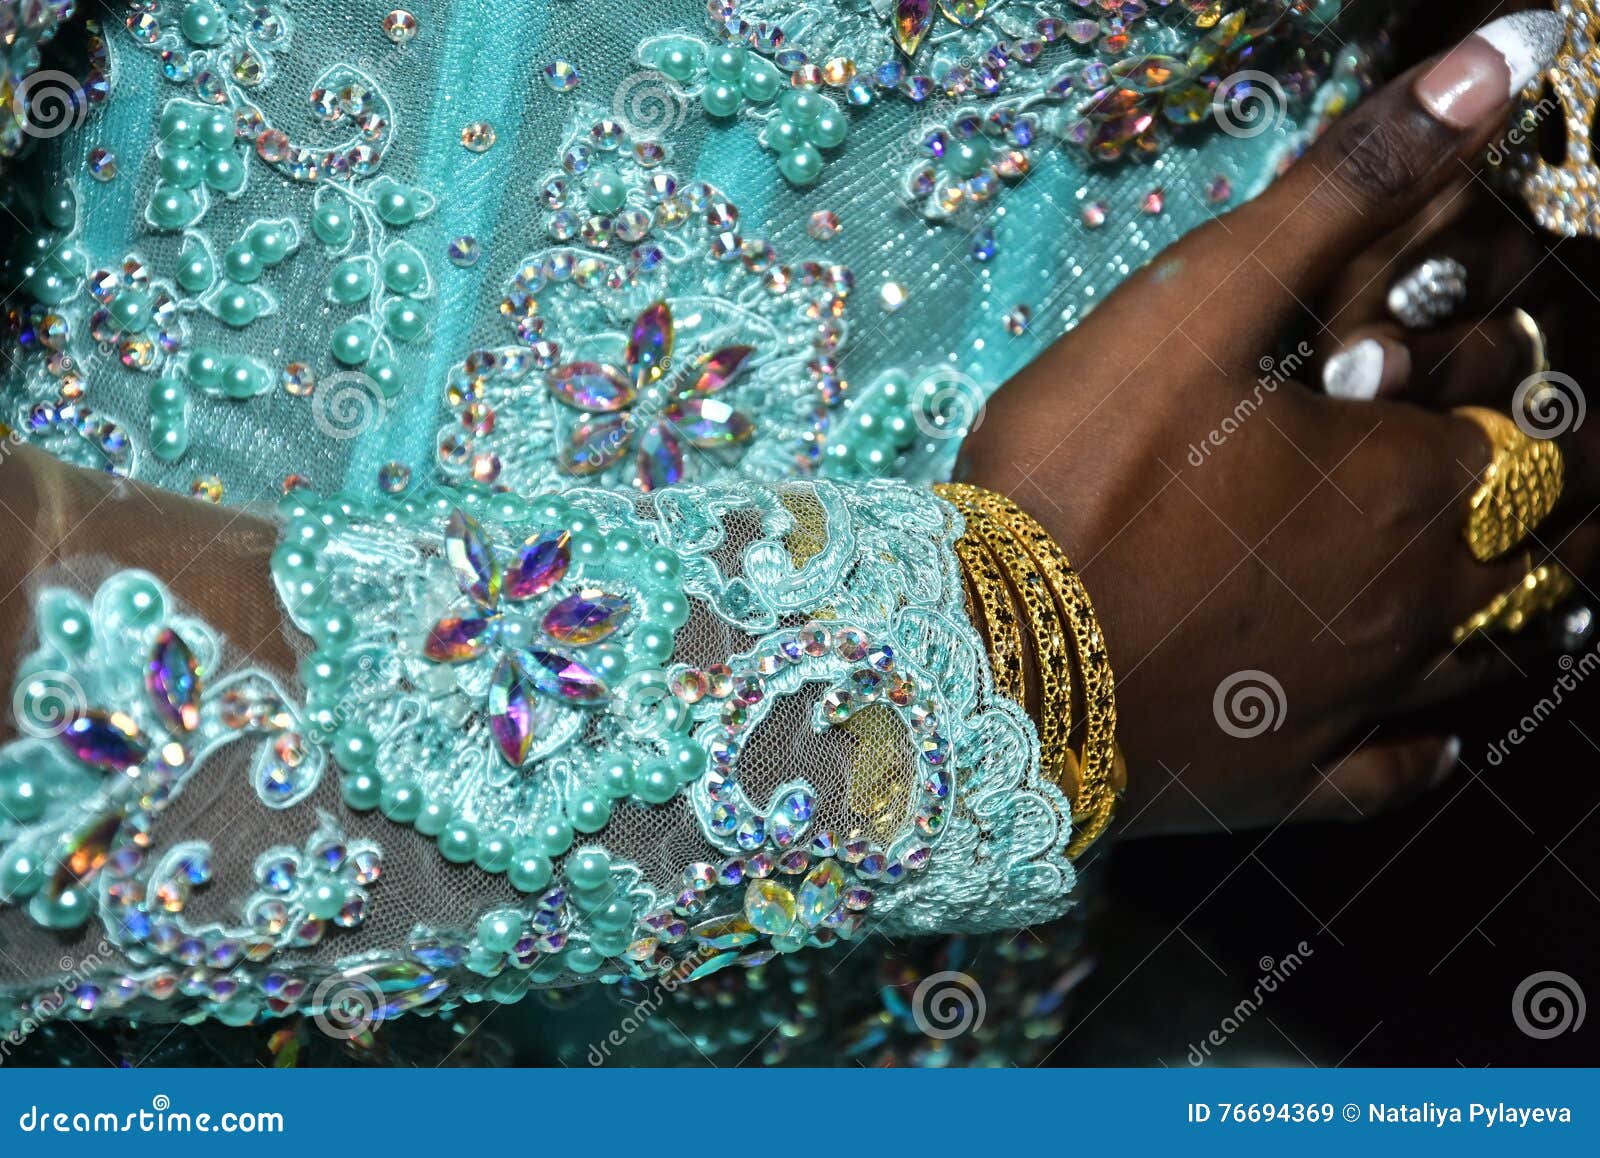 Hand Black Woman In A Turquoise Dress With Embroidery Stock Image Image Of Black Clothing 76694369